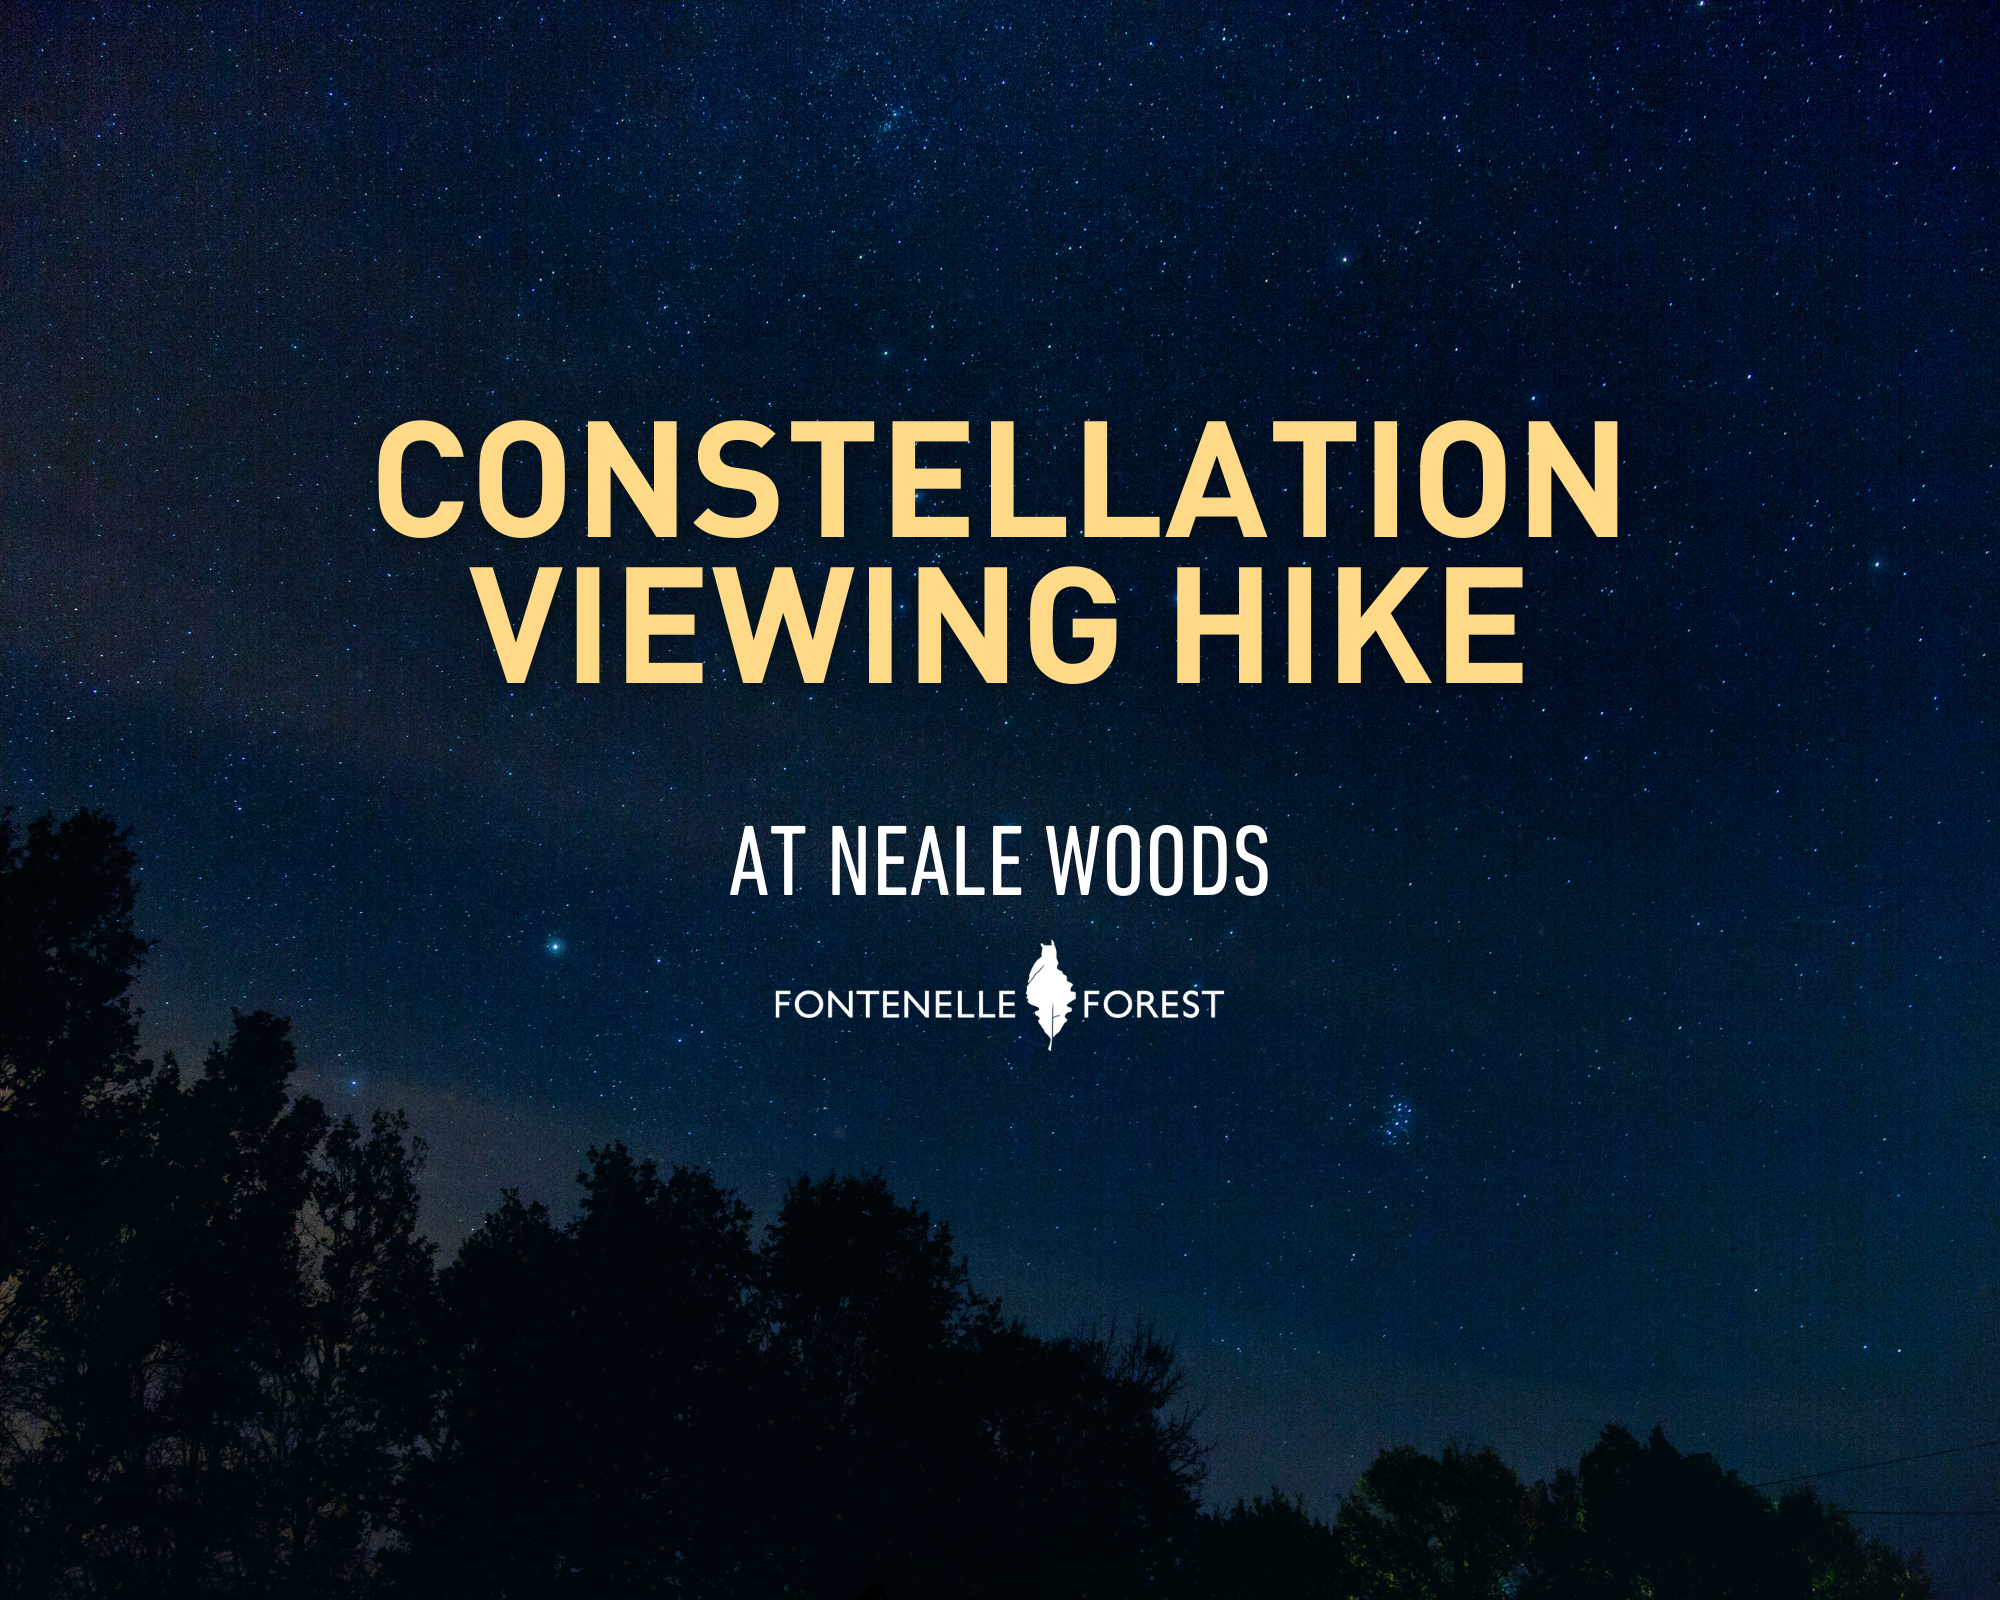 An image of a starry night sky overlayed by the words "Constellation Viewing Hike at Neale Woods," and the Fontenelle Forest logo.